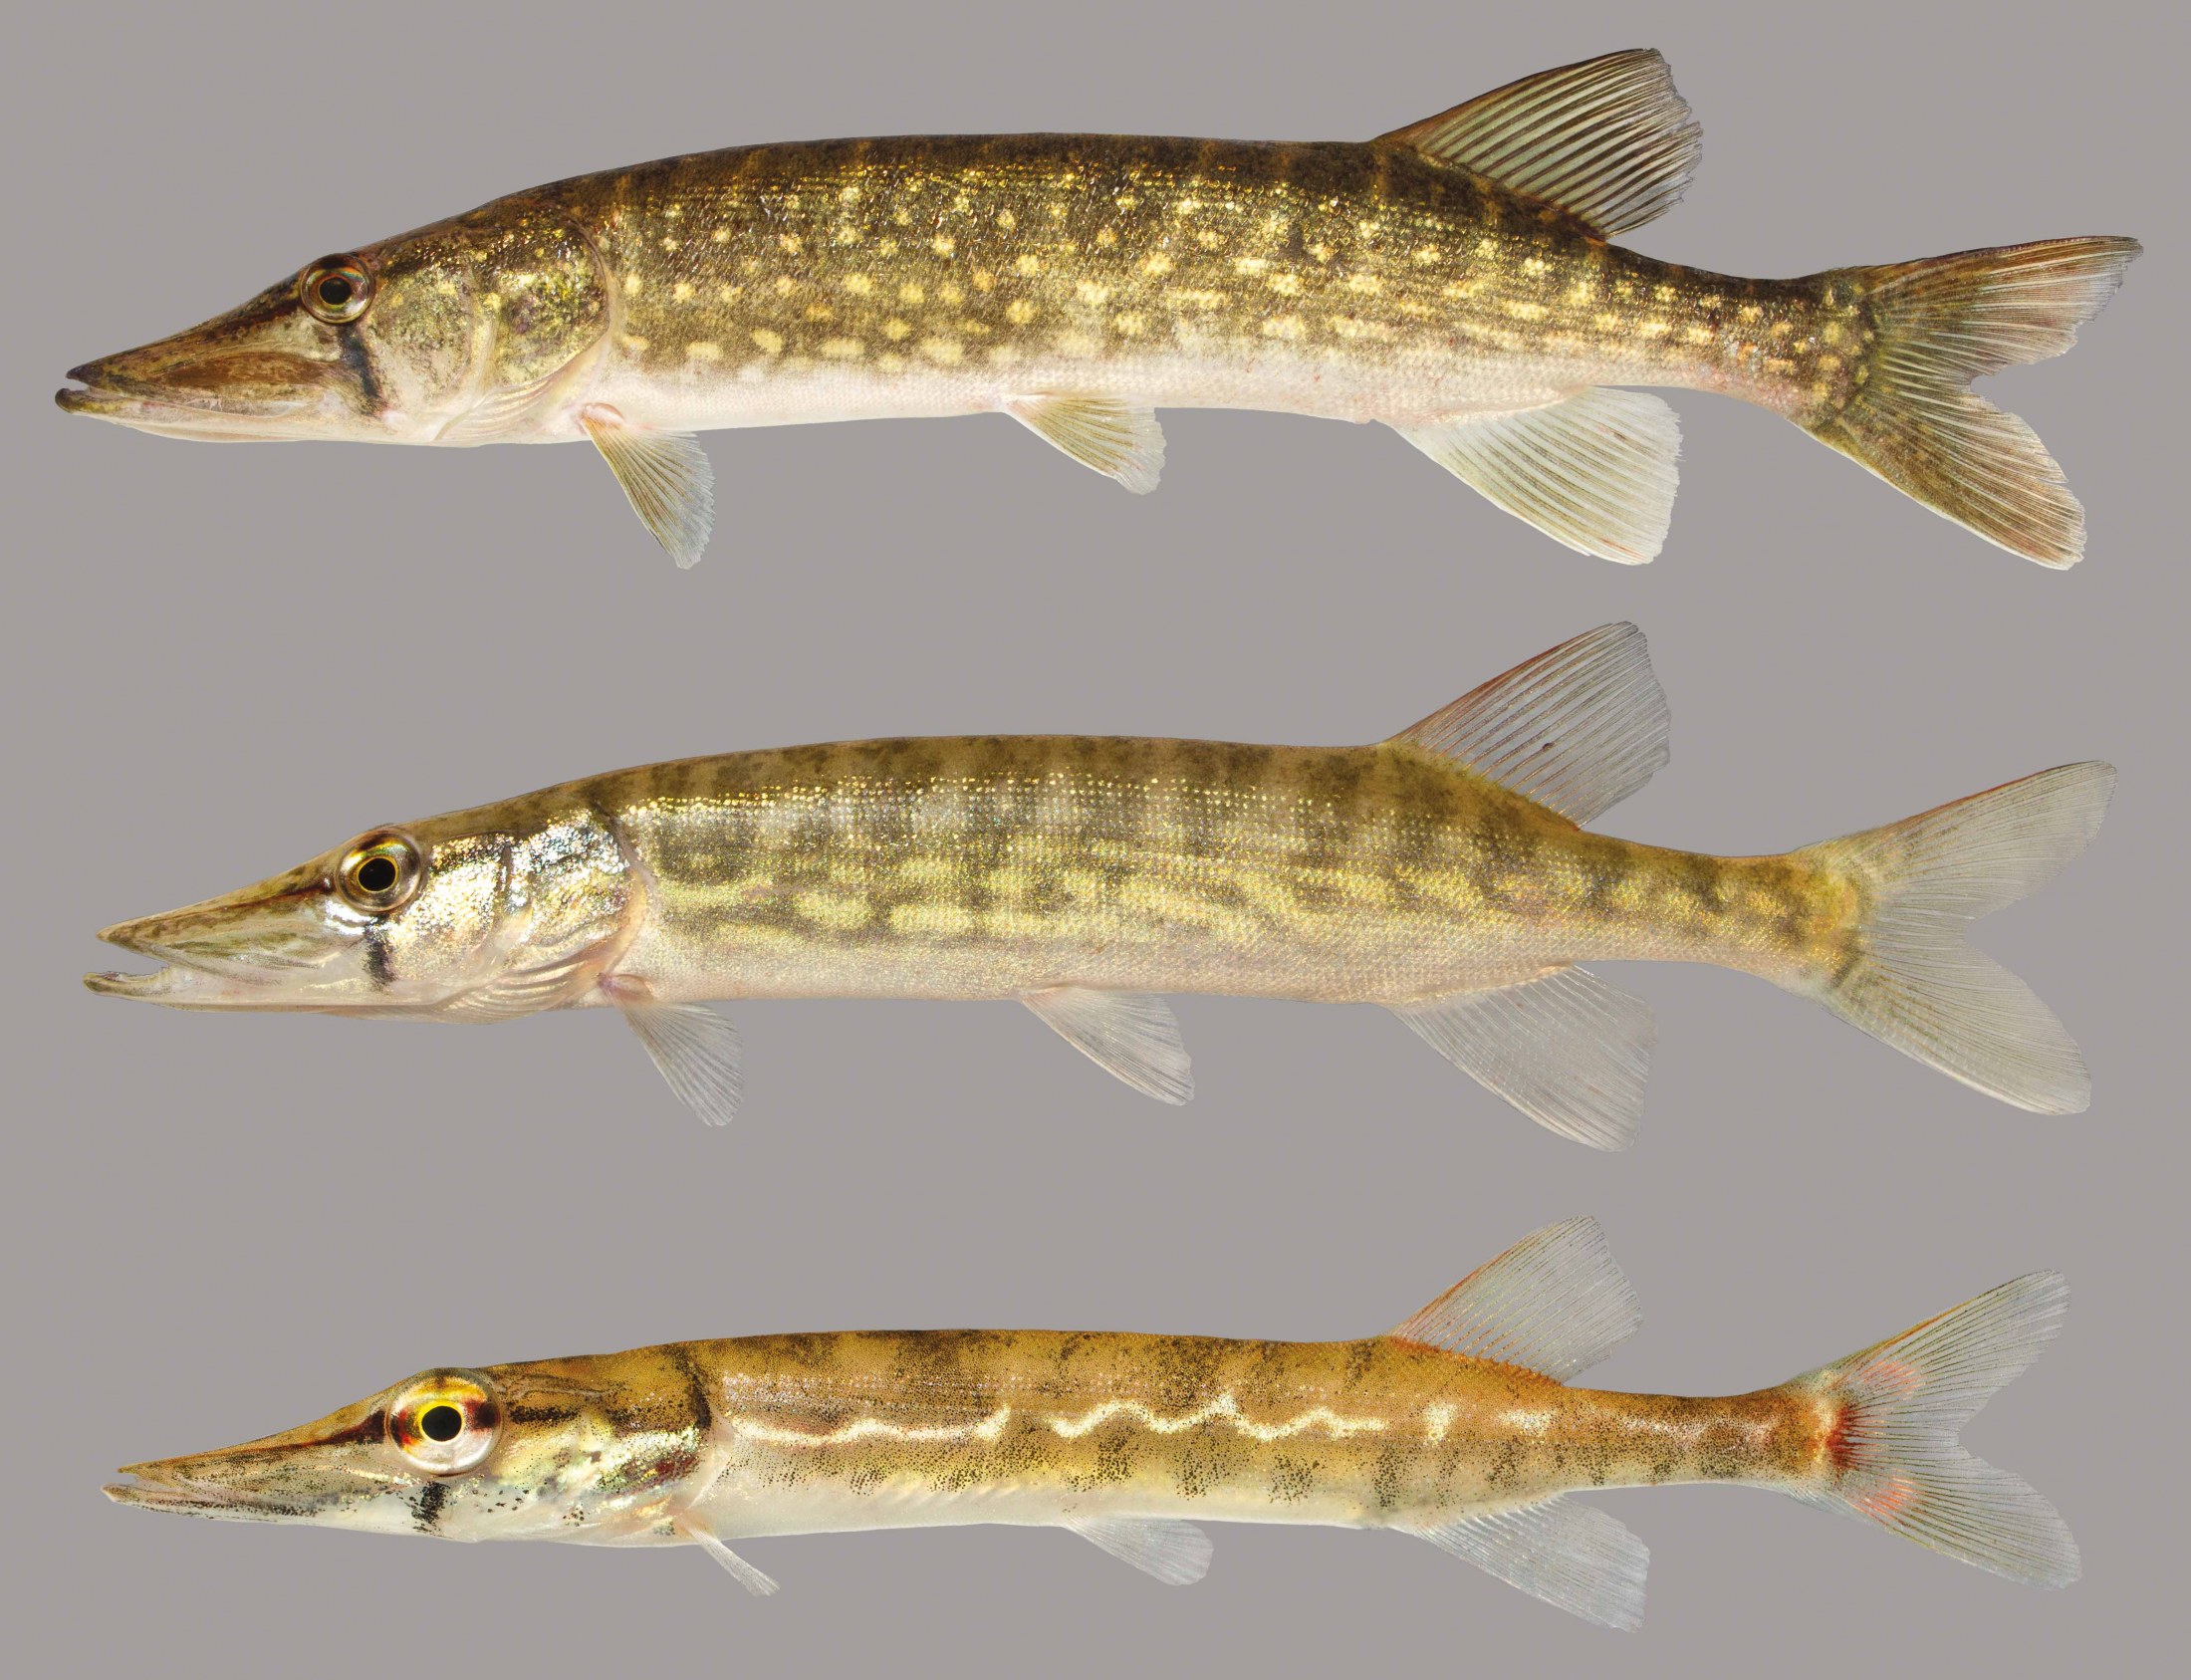 Lateral view of chain pickerel